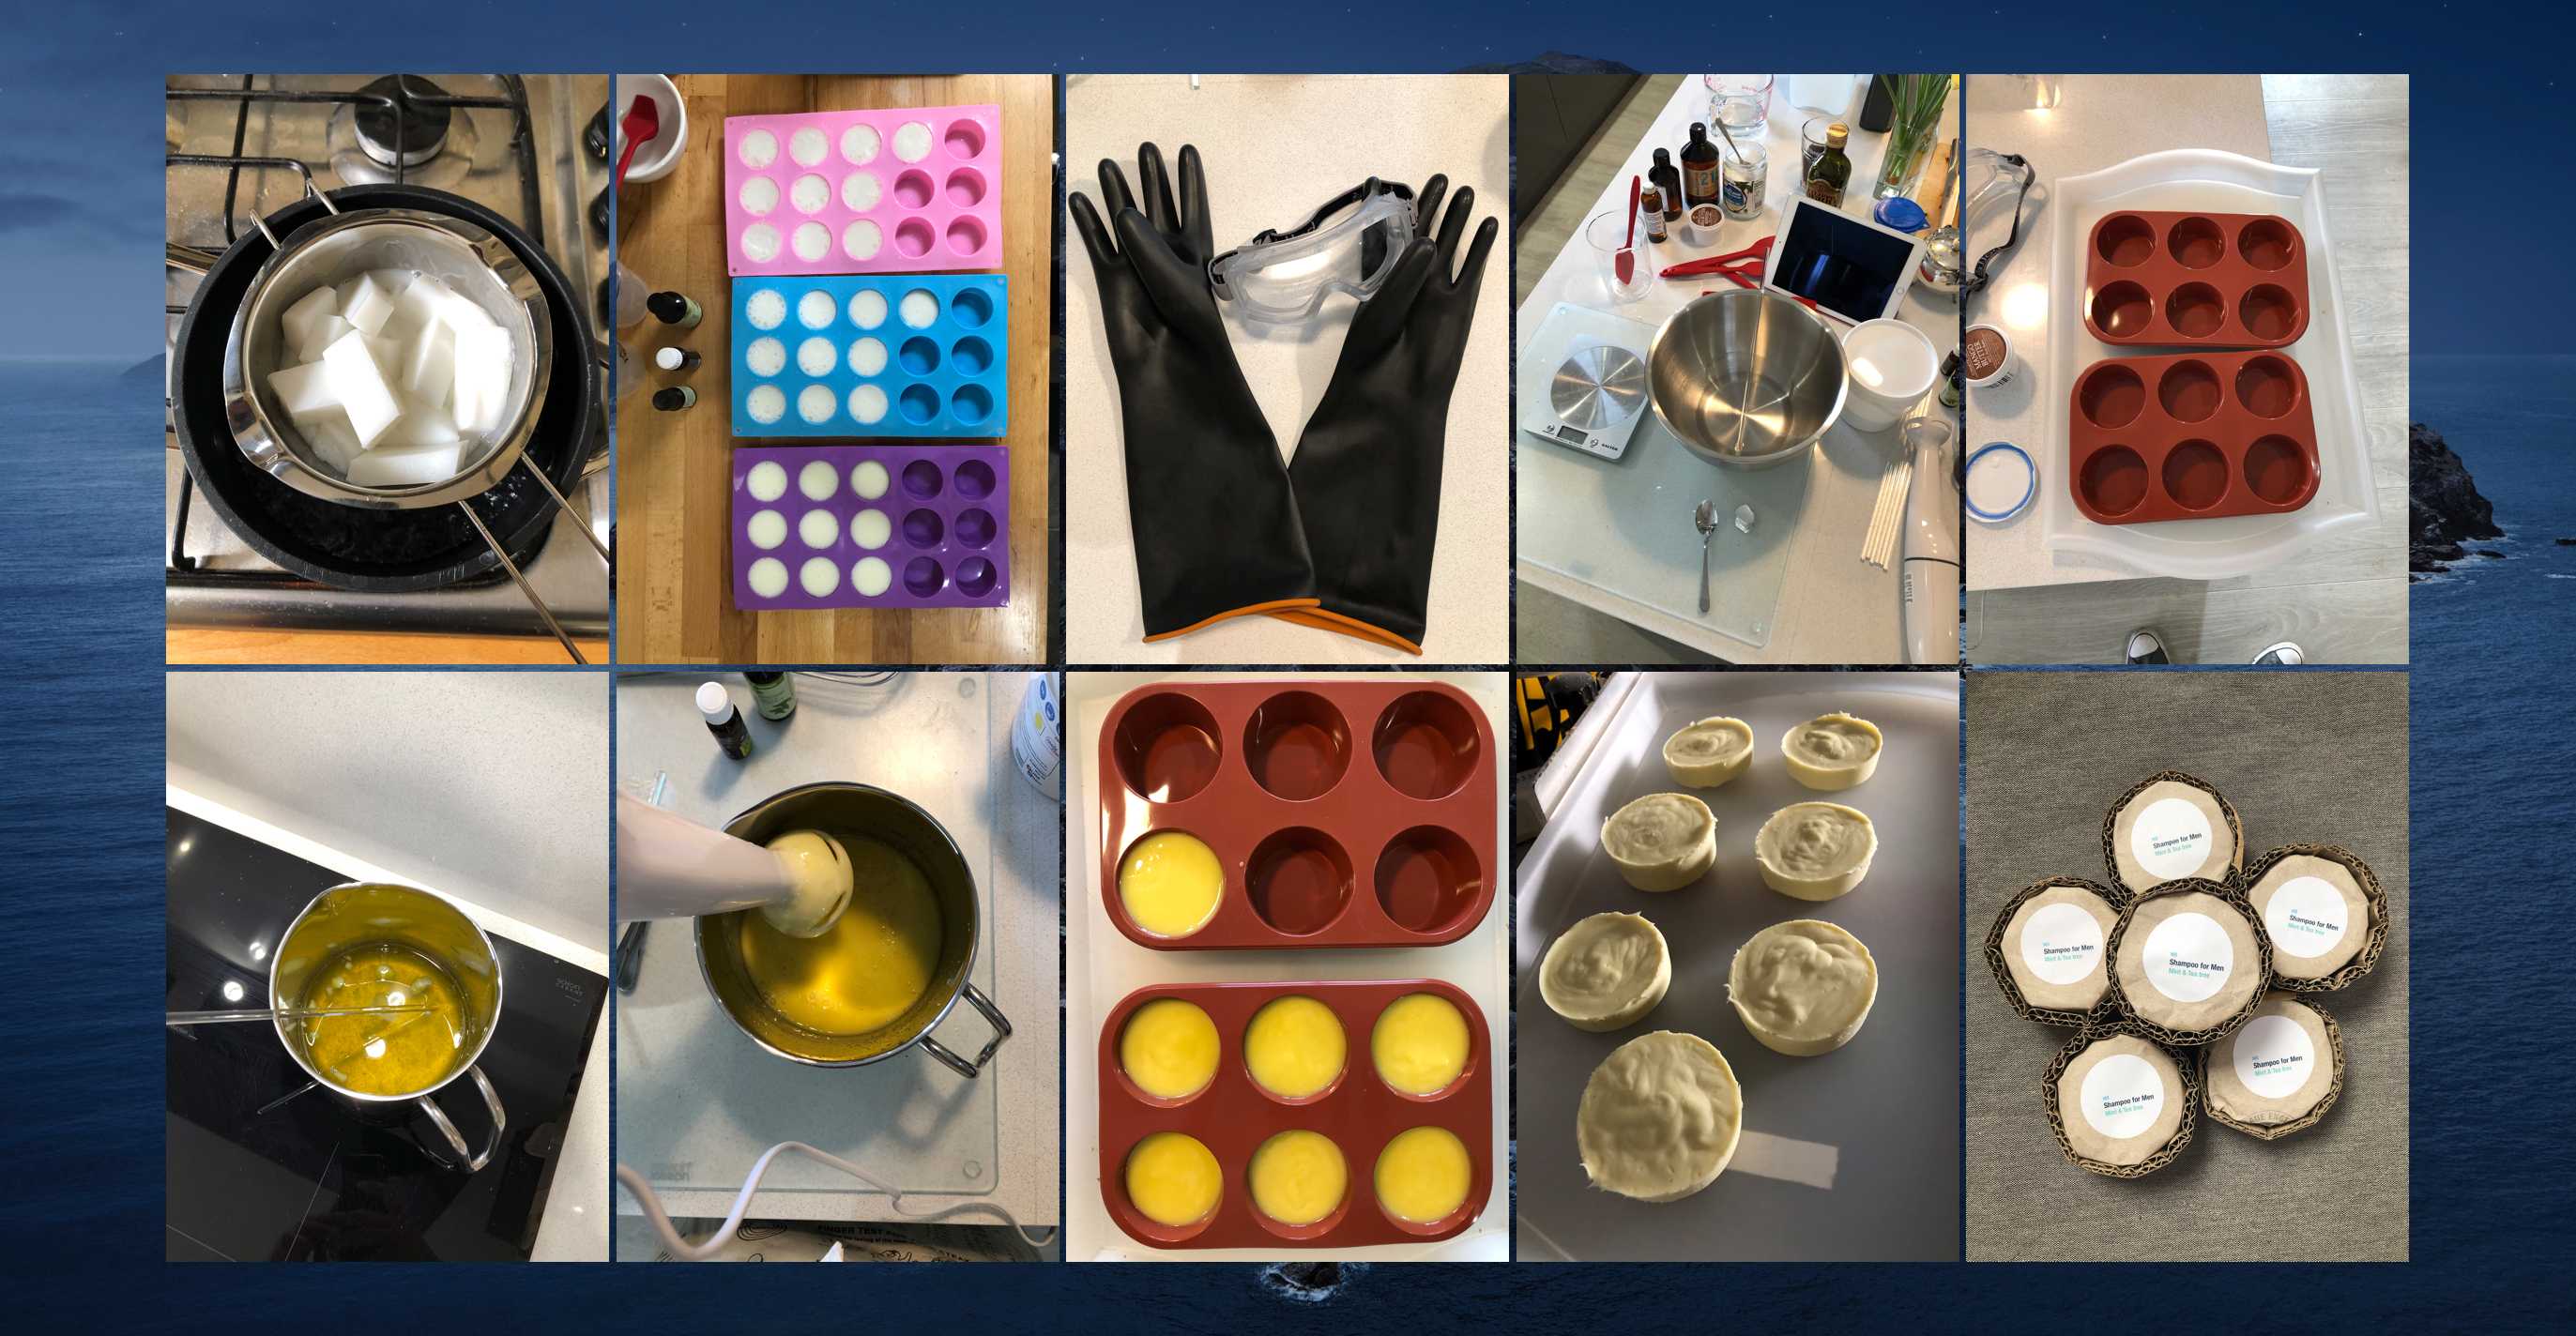 Photos of various stages of the product development process